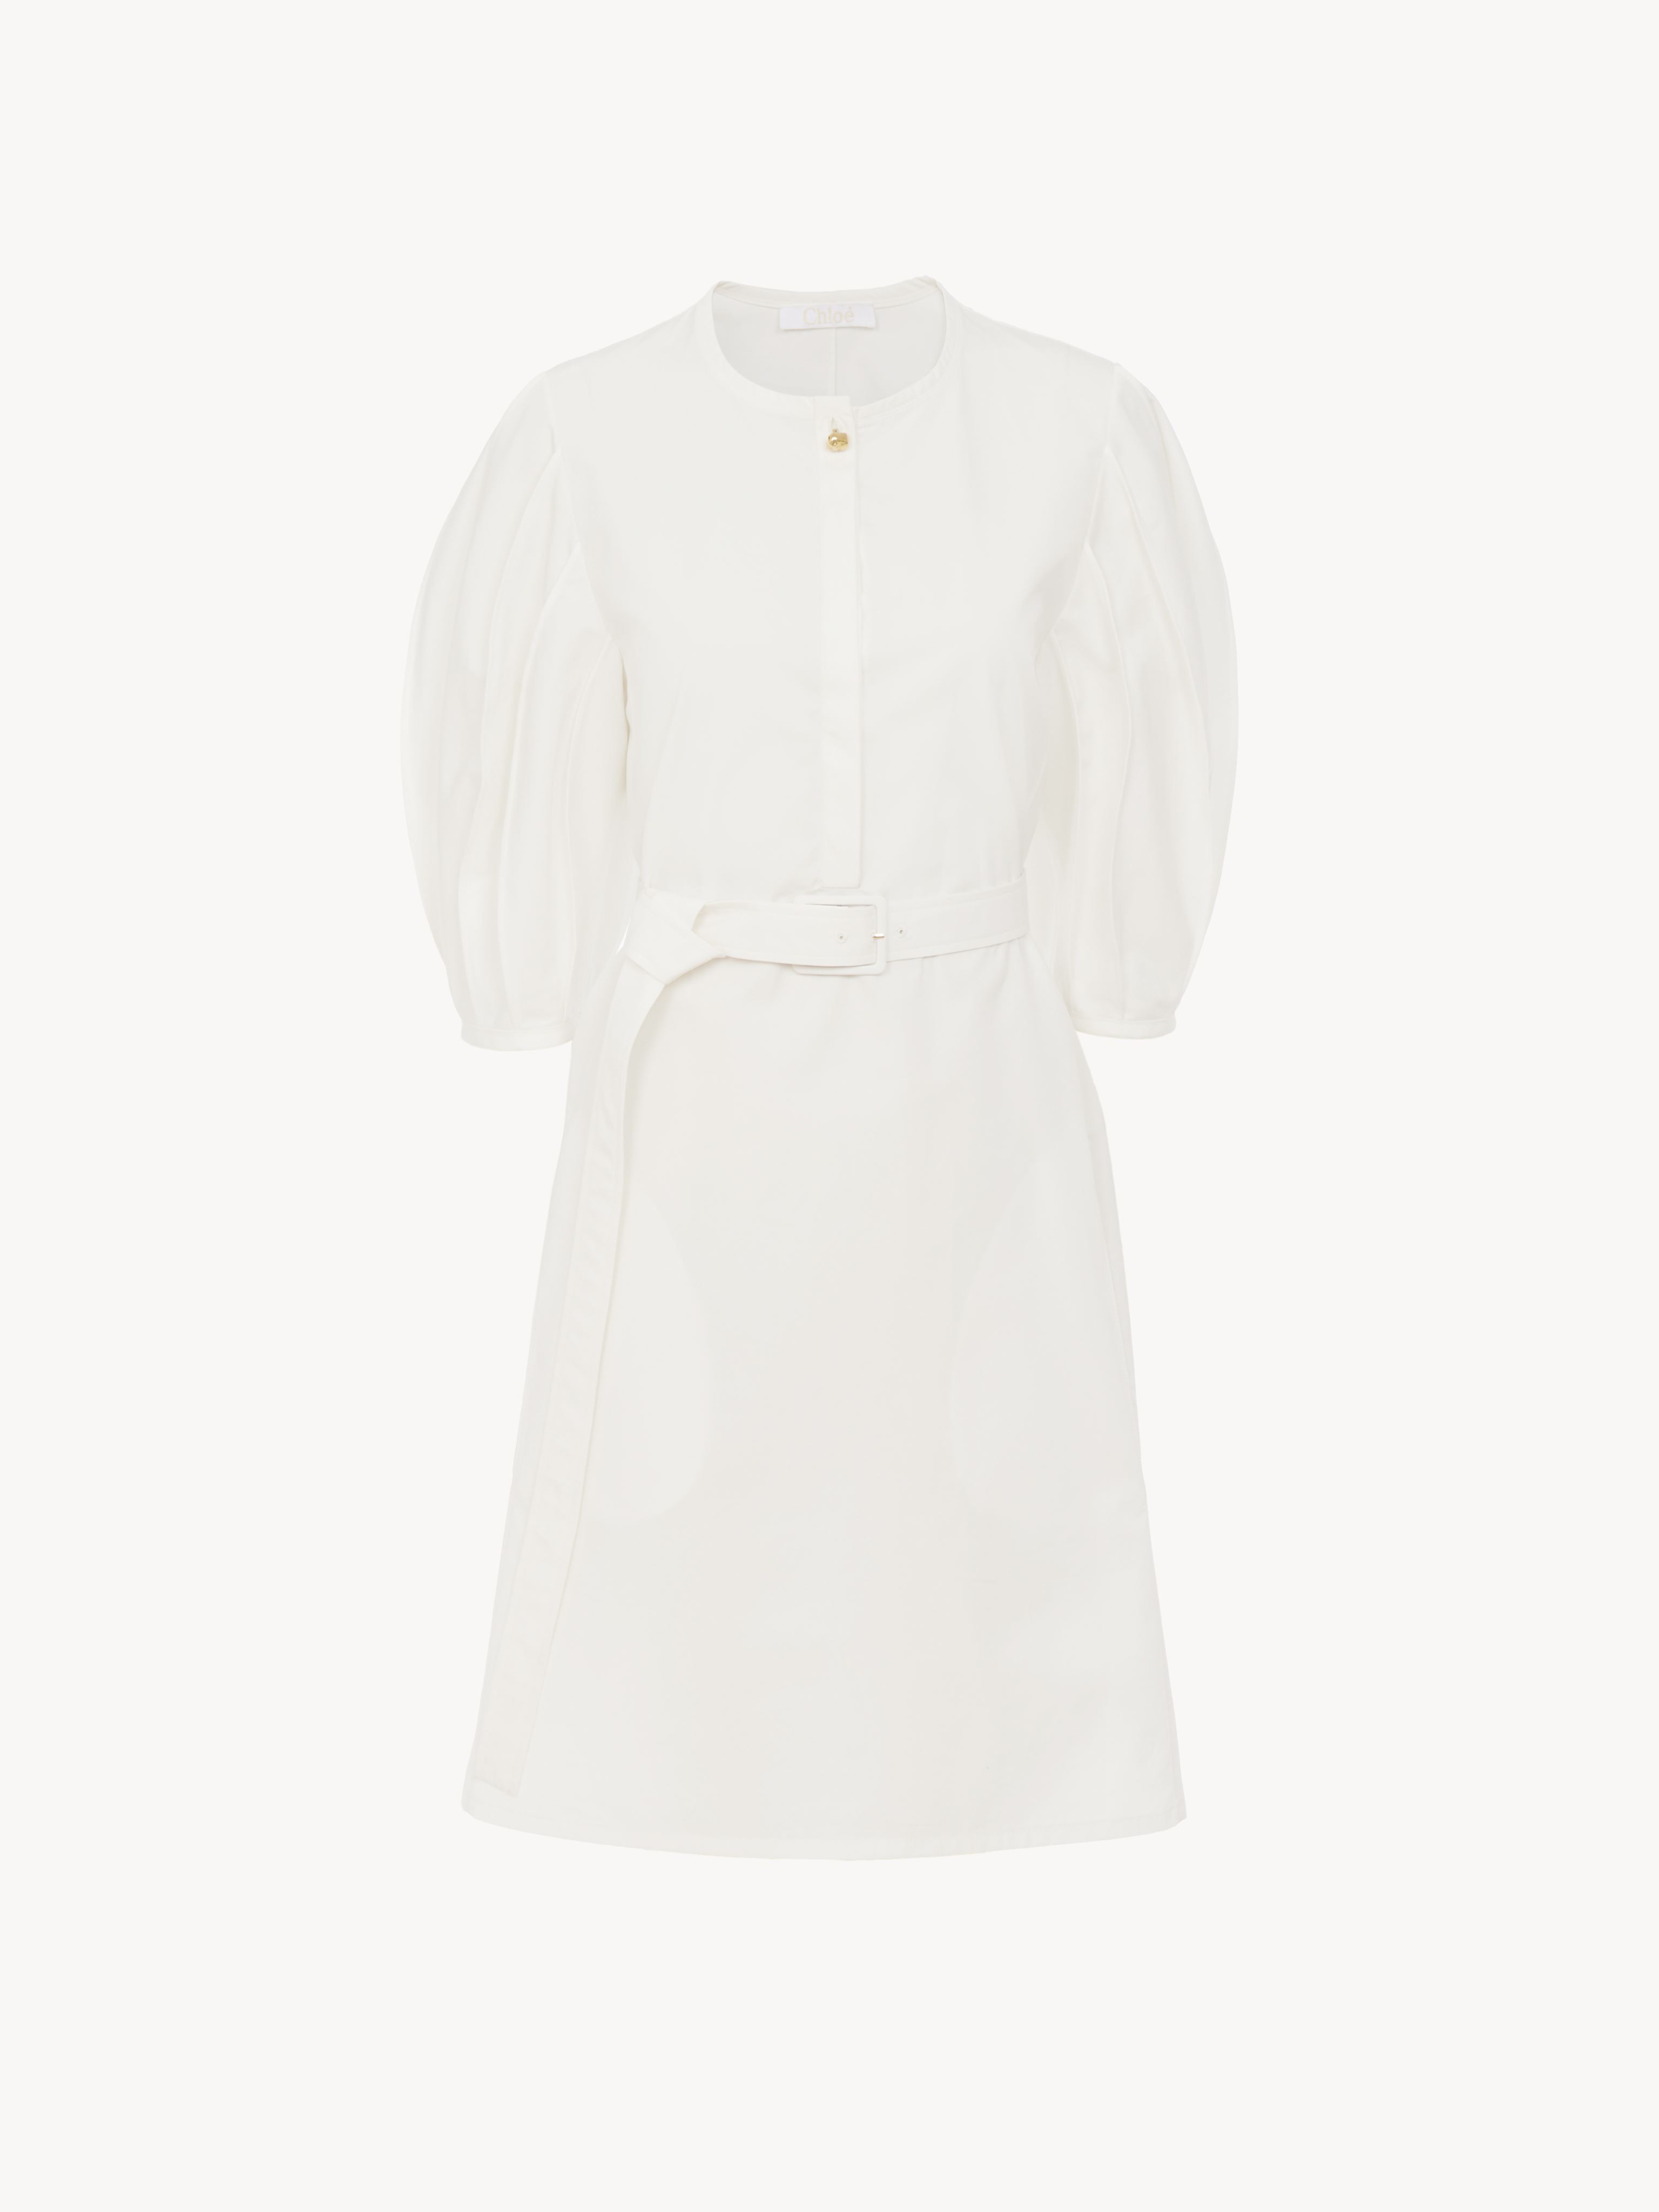 Chloé Robe Chemise Courte Manches « Lanterne » Femme Brun Taille 38 100% Coton, Pinctada Maxima, Farmed, C In Brown